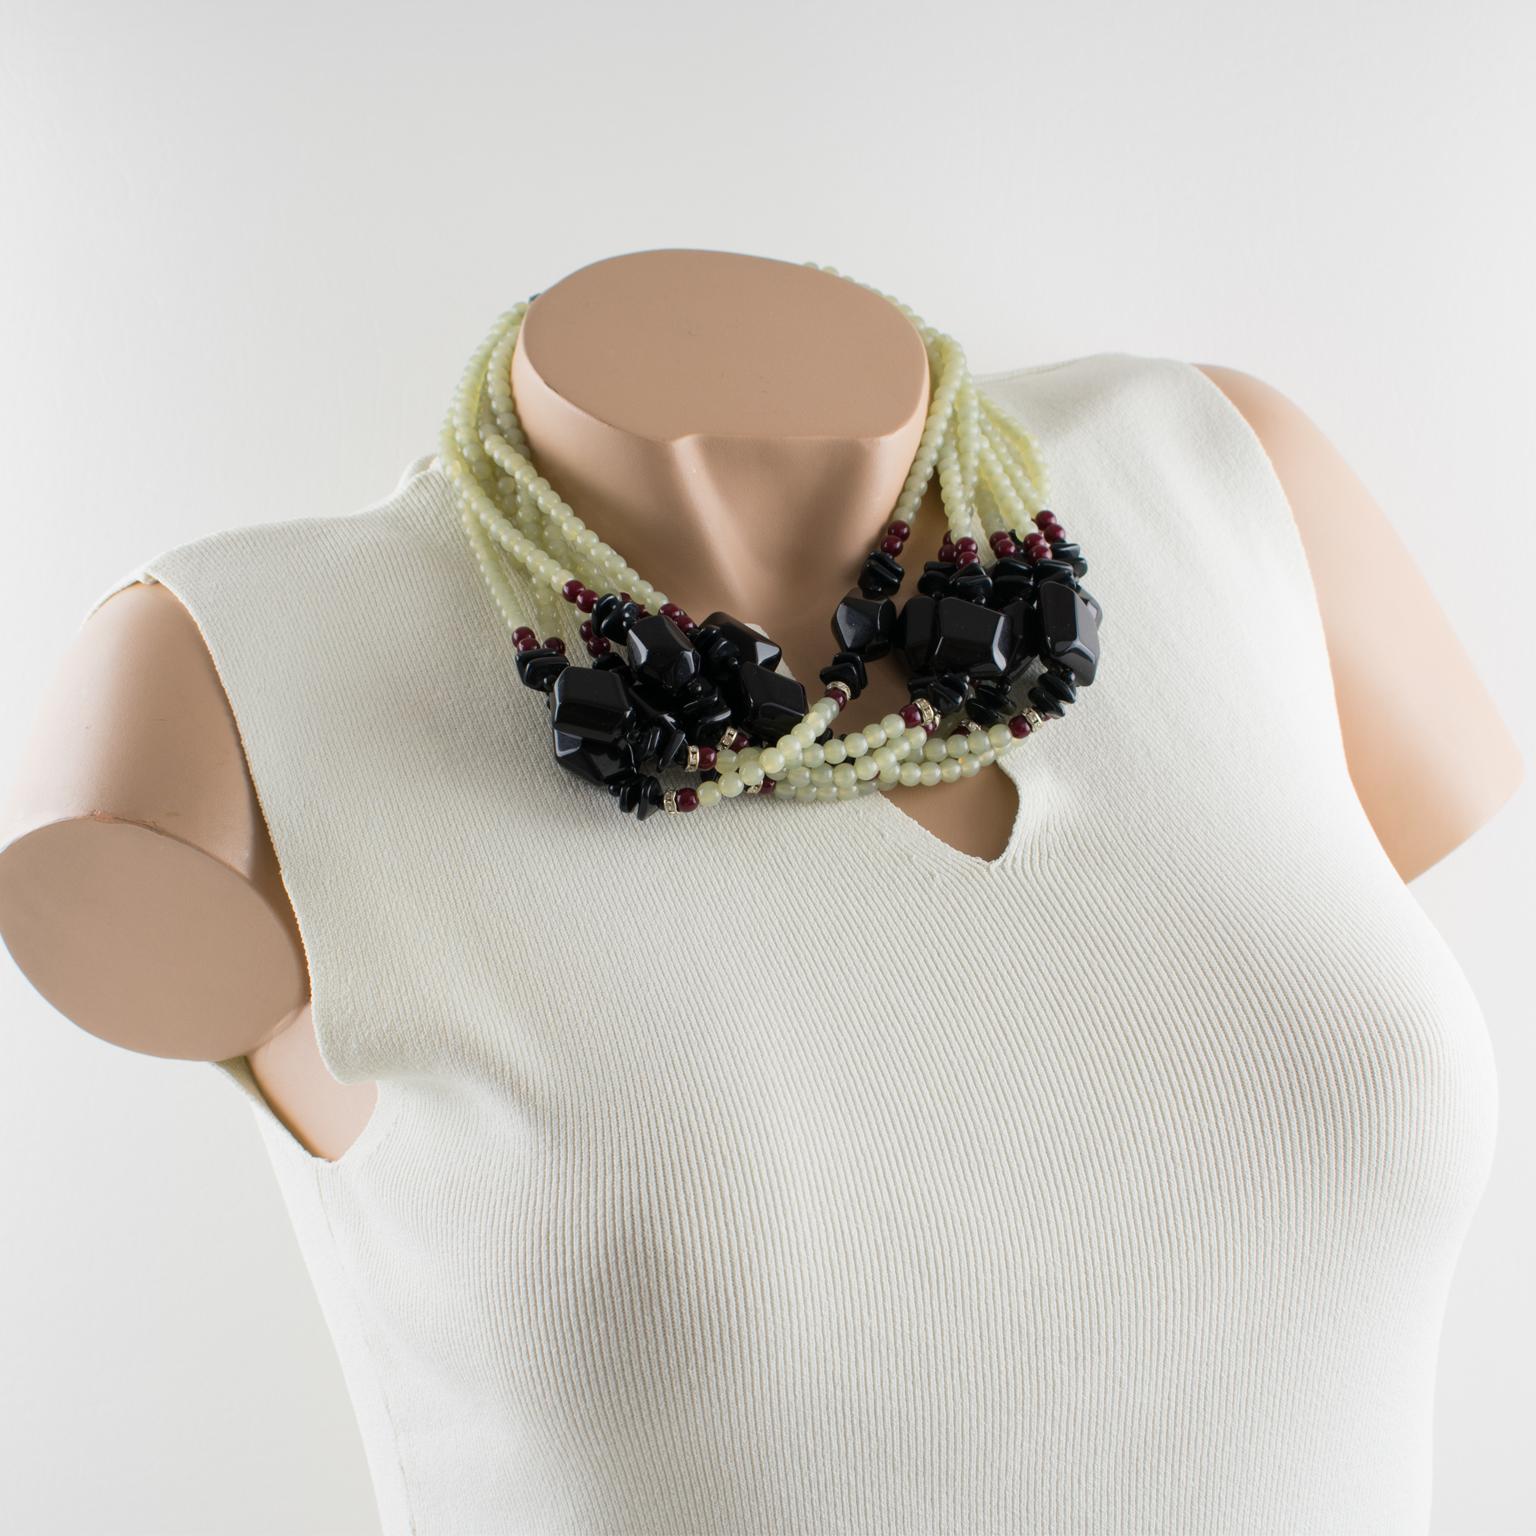 This stylish Angela Caputi, made in Italy, multi-strand beaded choker necklace is made of three colors of resin beads with seven strands. Assorted color range with black, burgundy red, and aqua green and complimented with crystal clear rhinestone